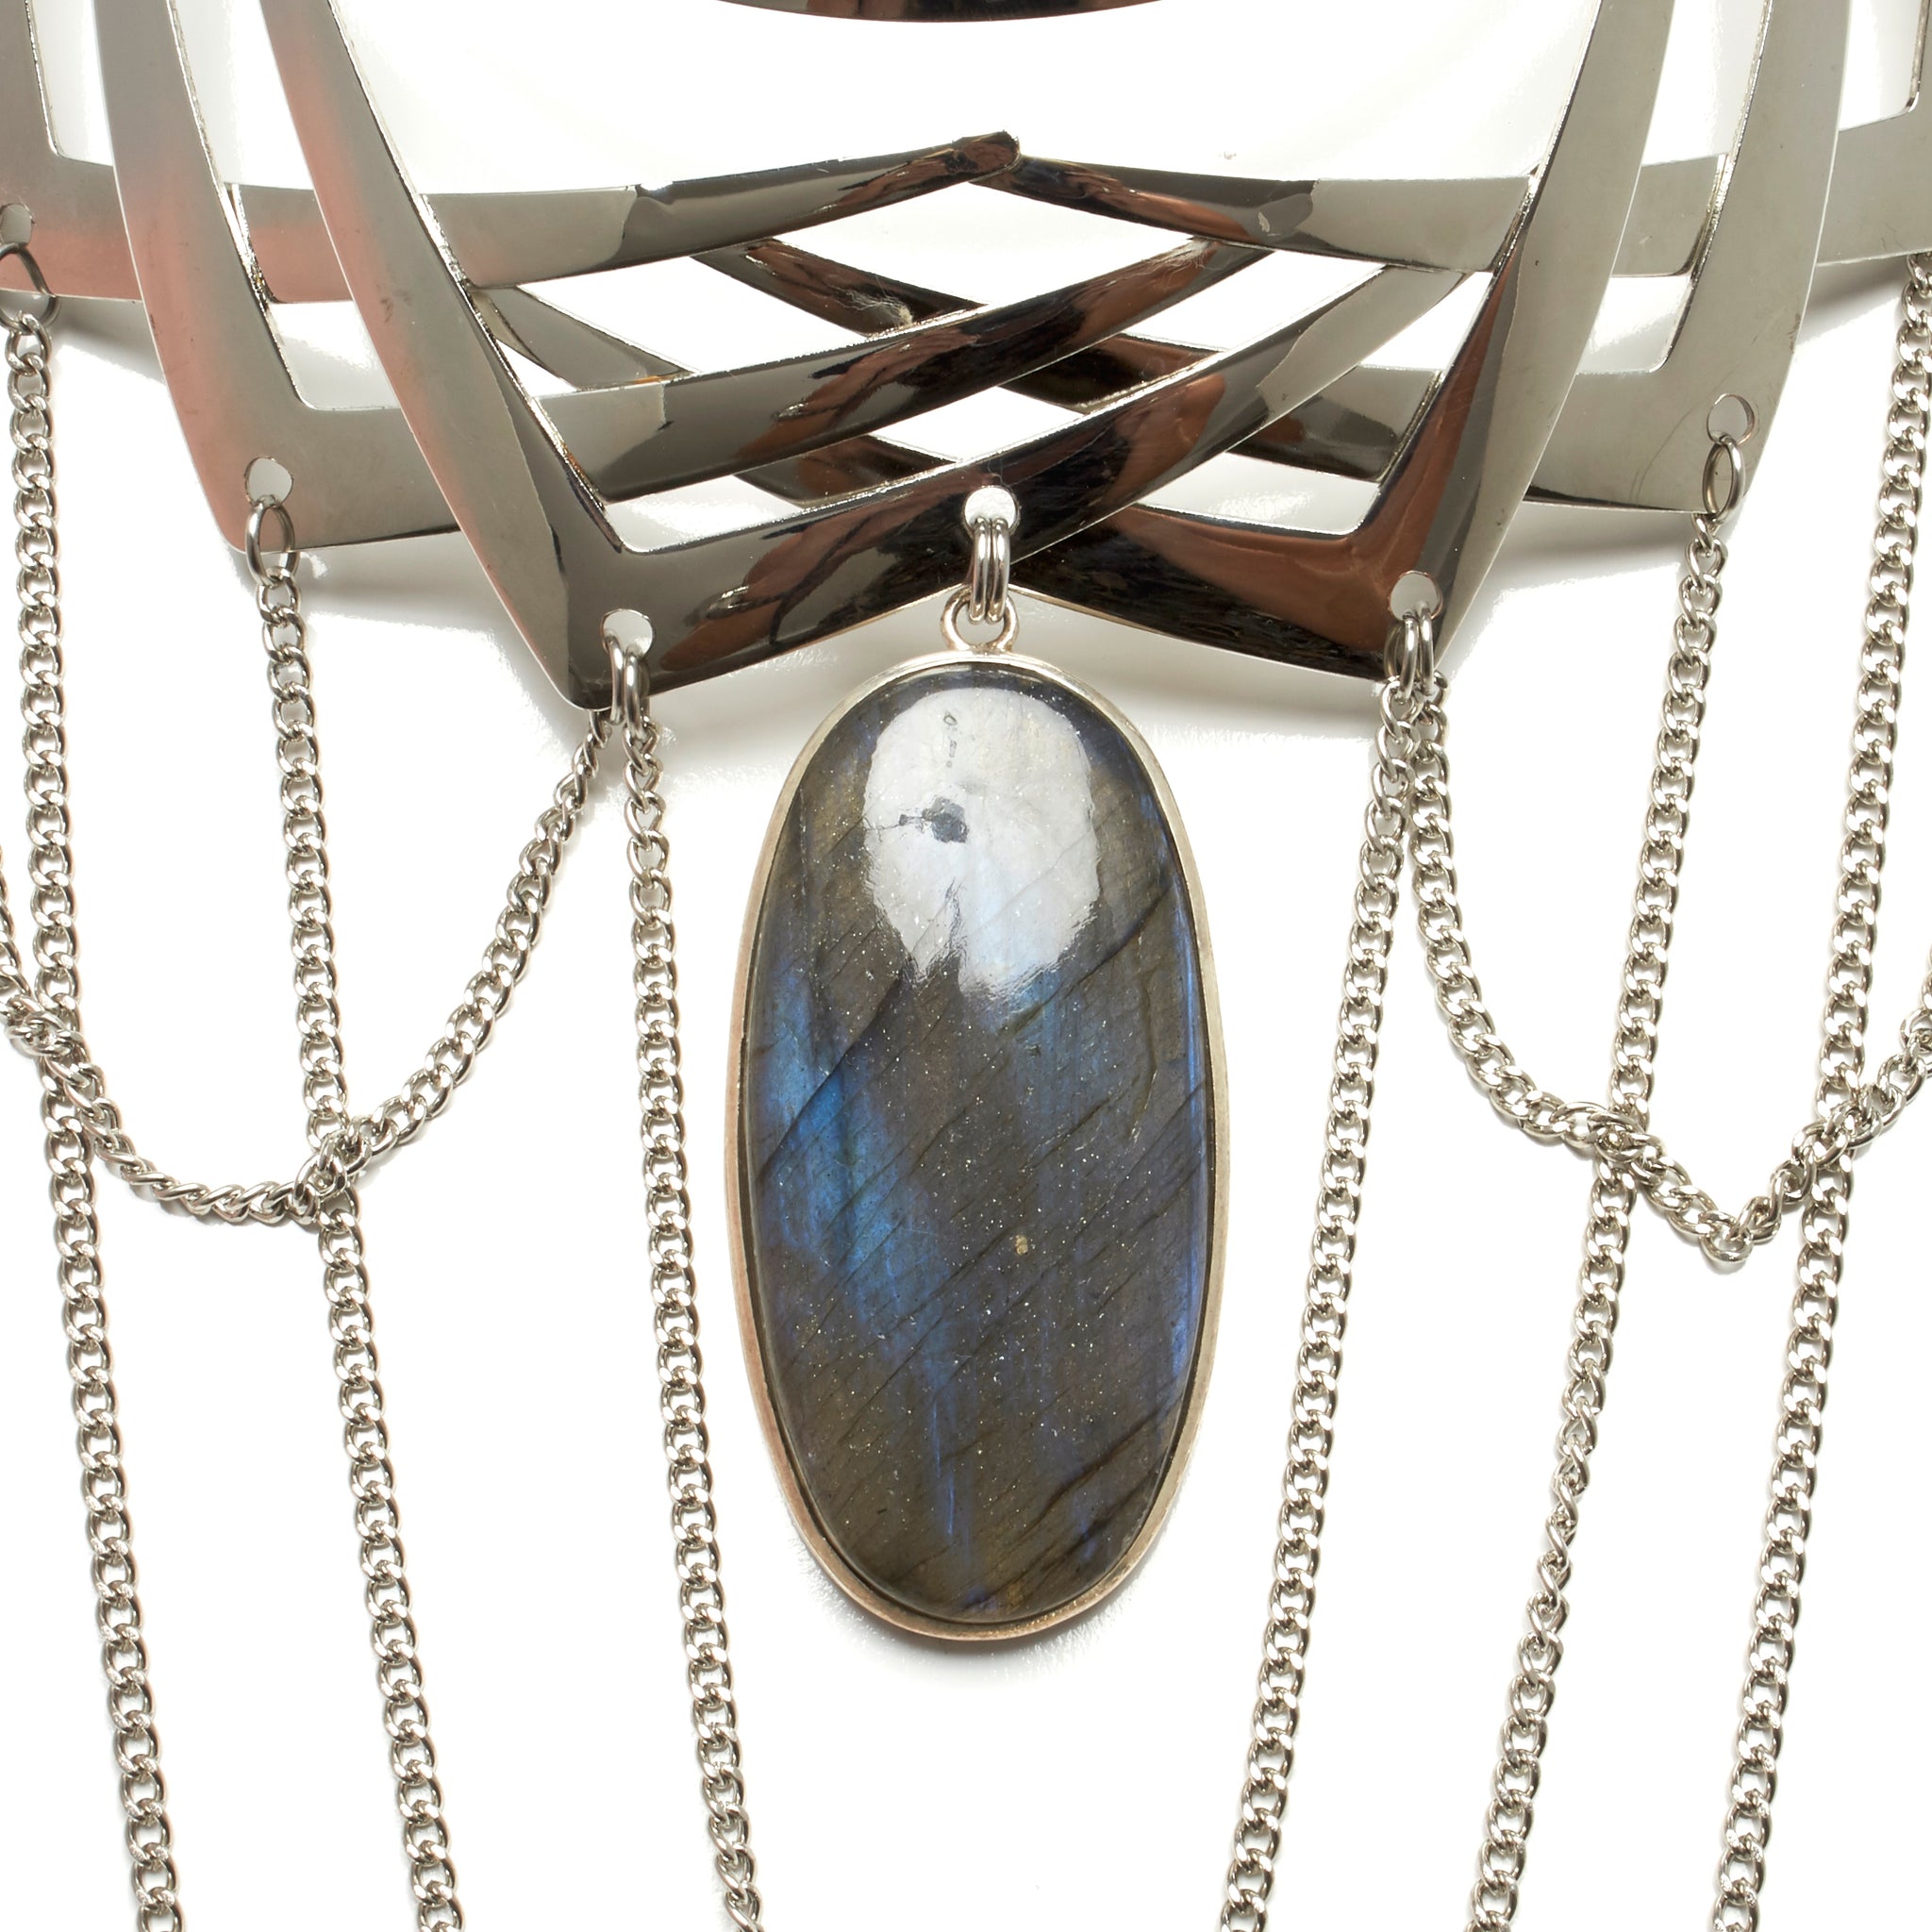 INTRICATE TORQUE NECKLACE WITH CHAINS AND LARGE LABRADORITE STONE PENDENT. by nyet jewelry.